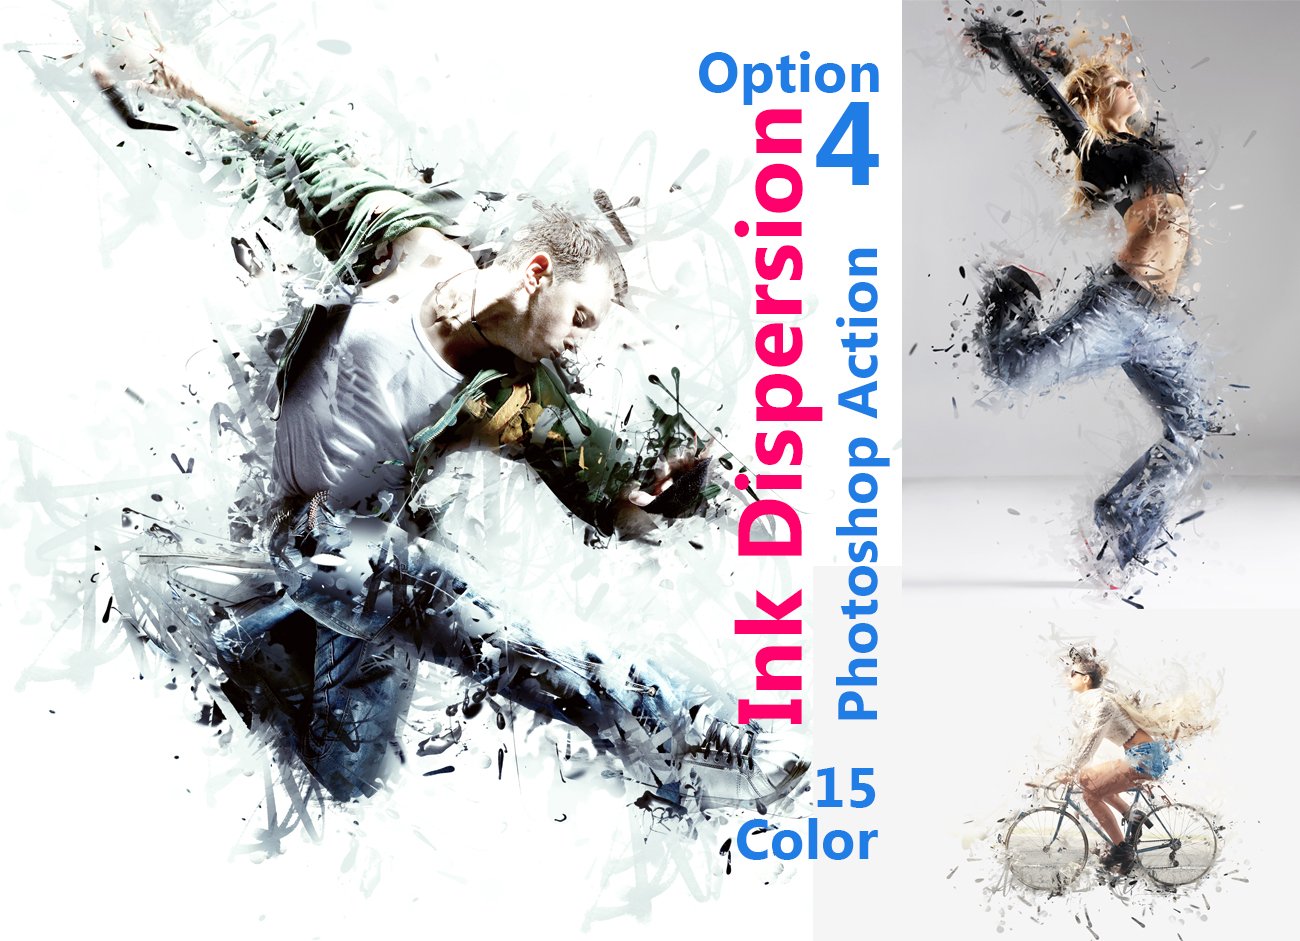 Ink Dispersion Photoshop Actioncover image.